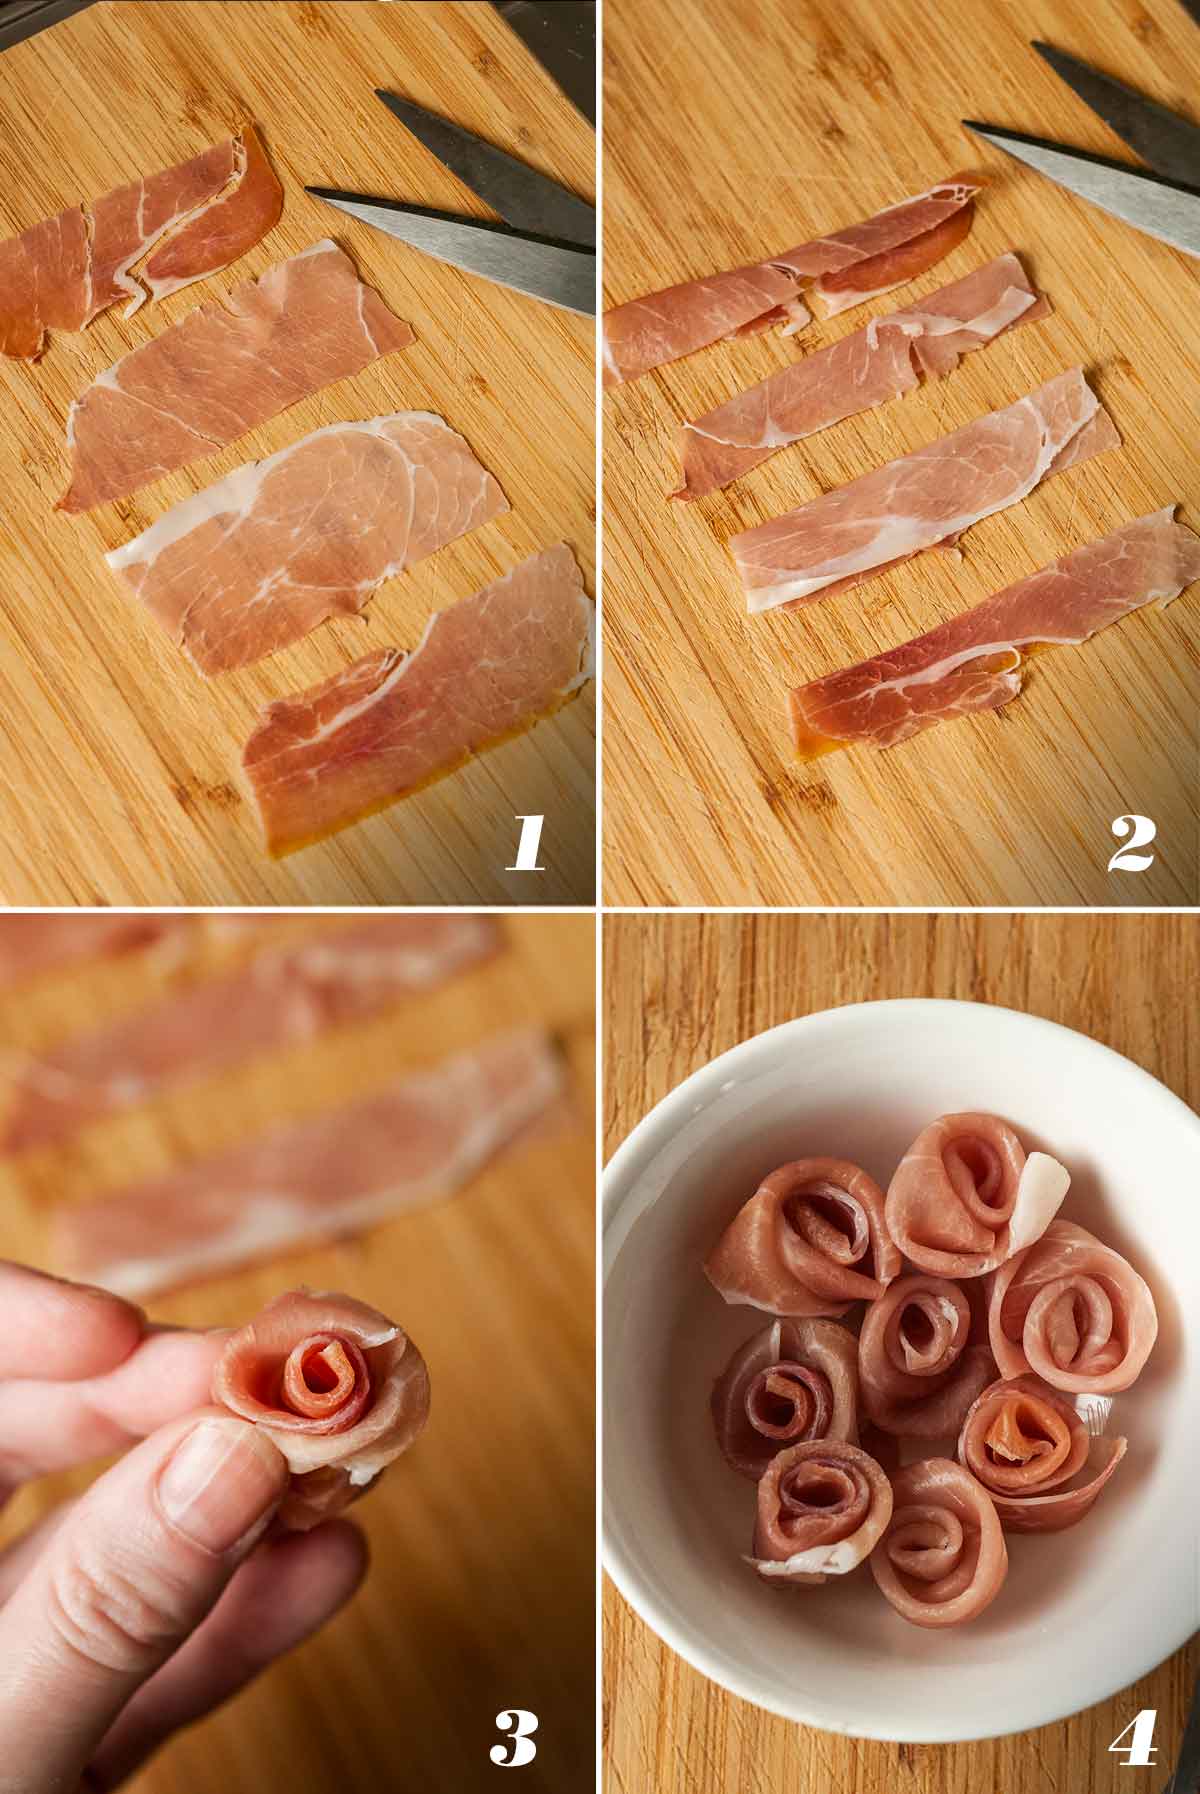 A collage of 4 numbered images showing how to make a prosciutto roses.